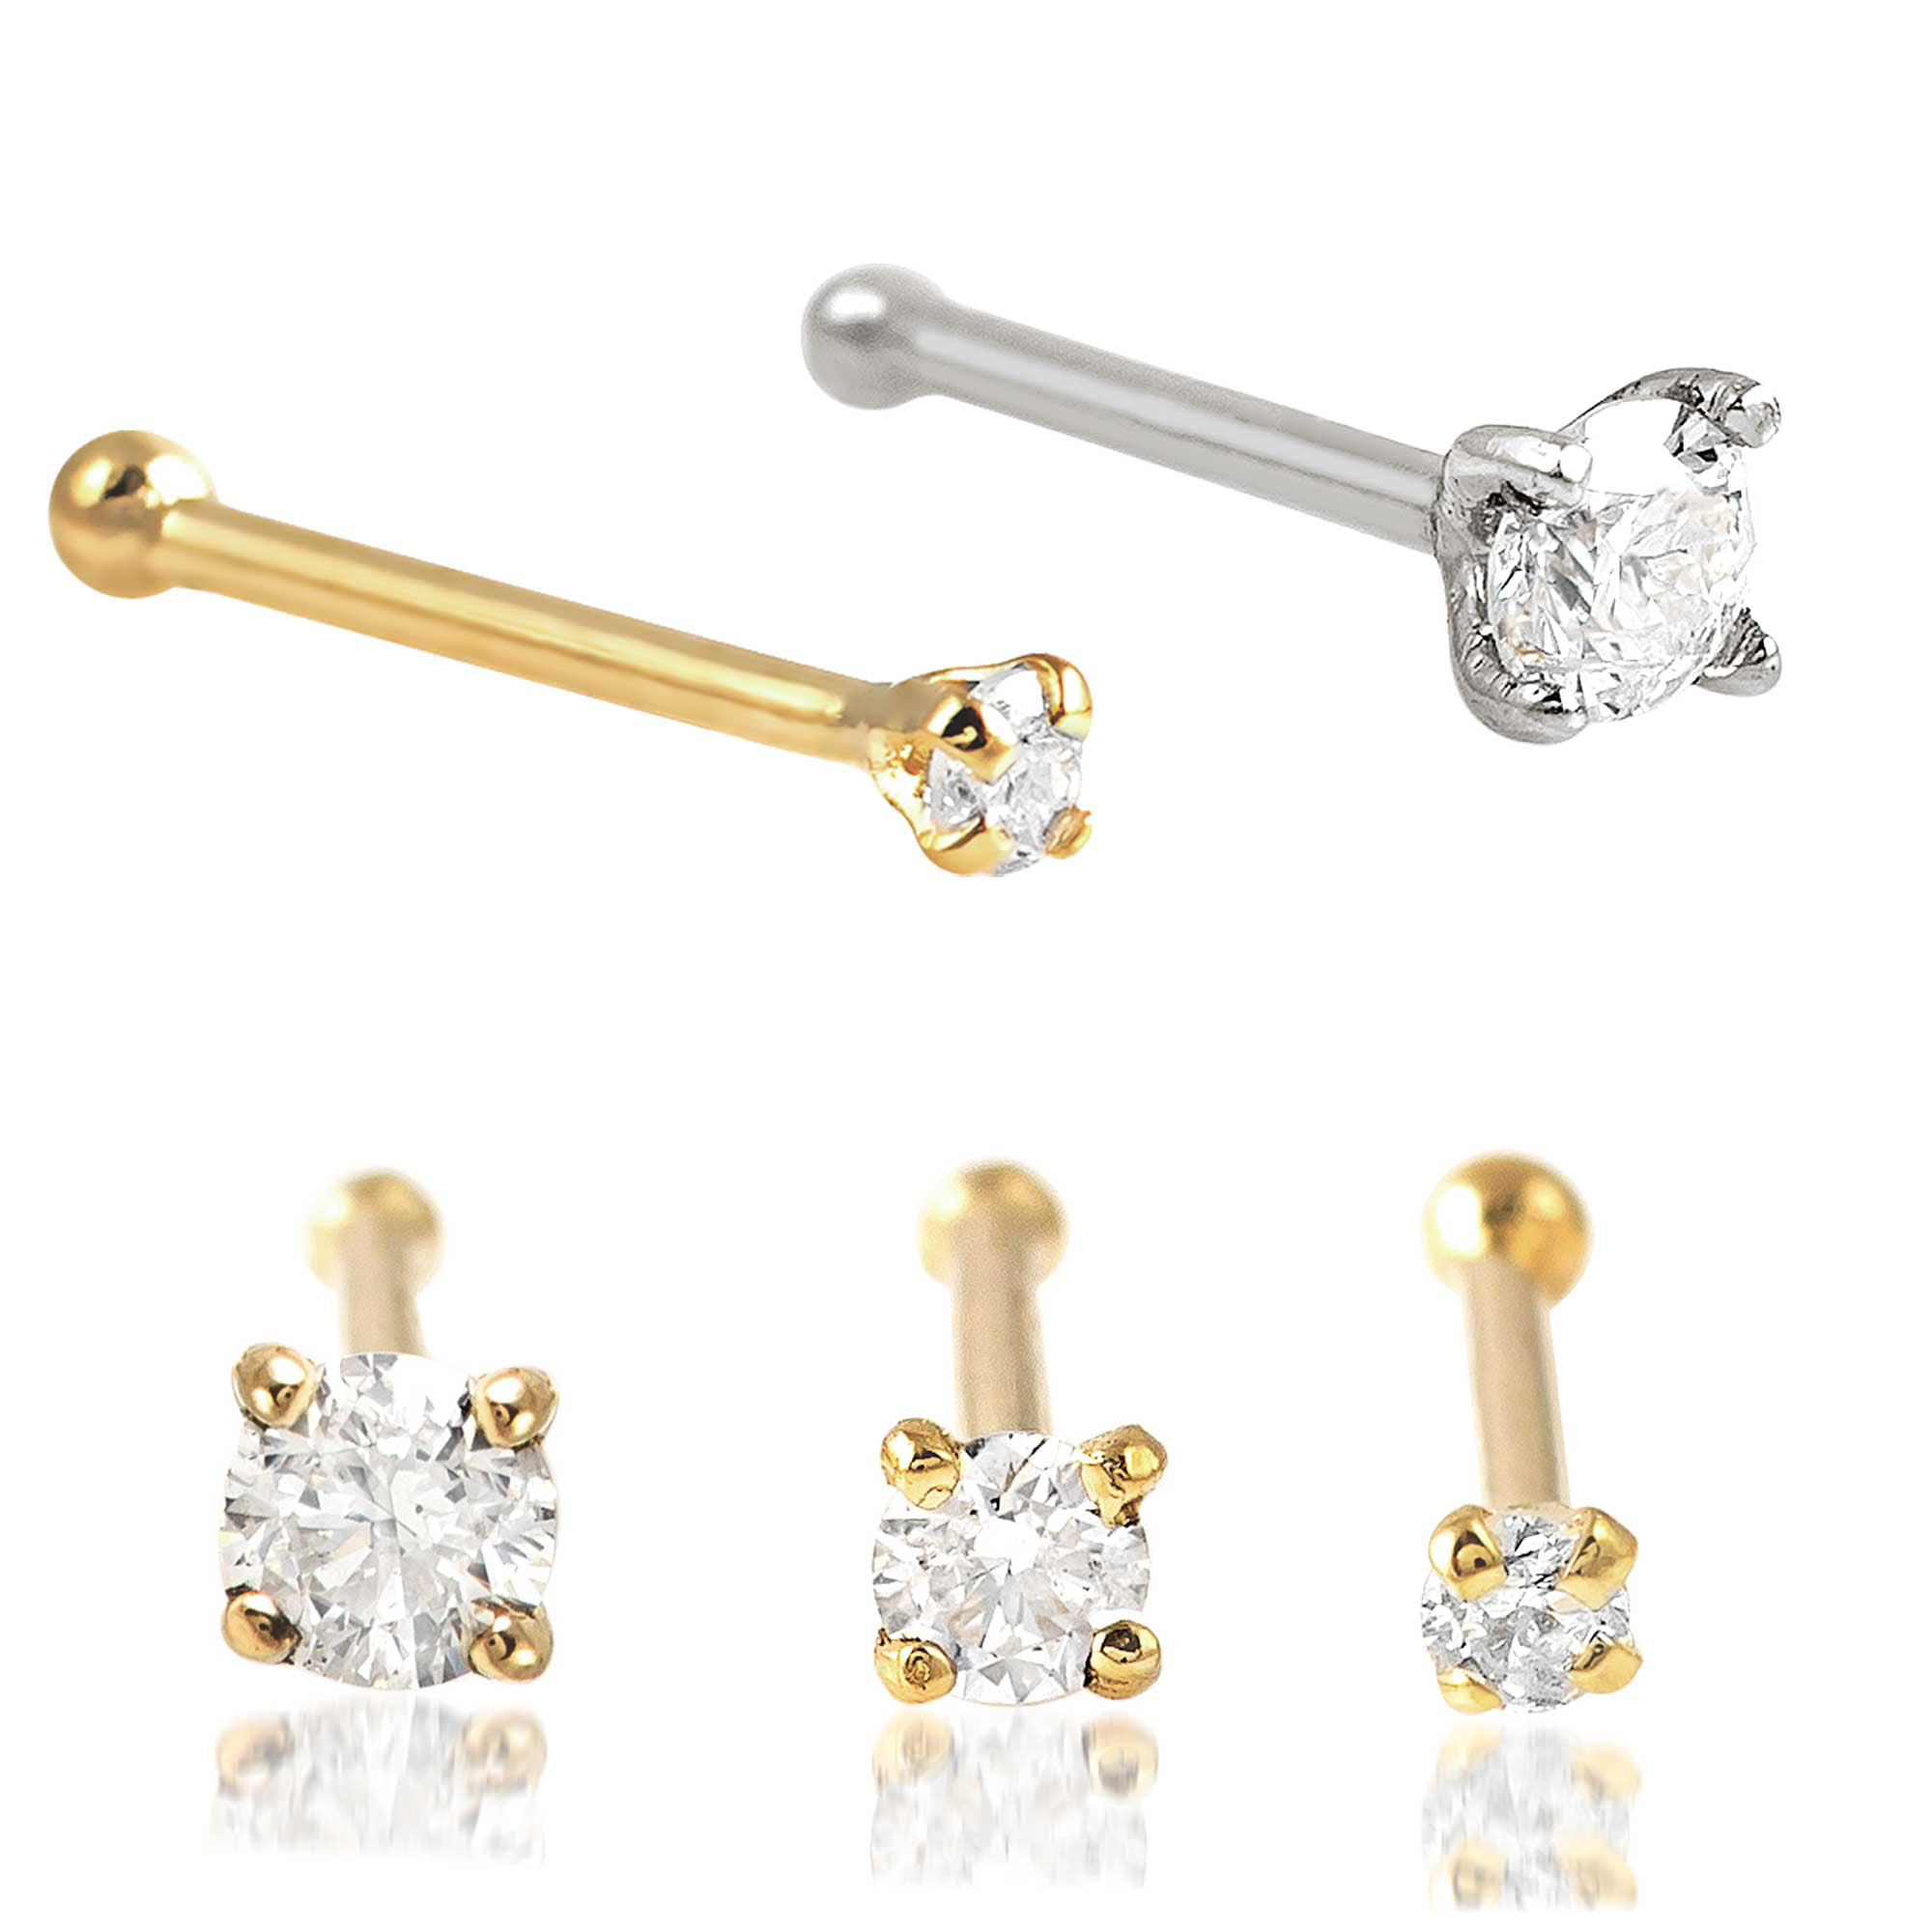 Ball End 22 GA "Moissanite" 14K Solid Yellow Gold  Nose Screw L shaped 